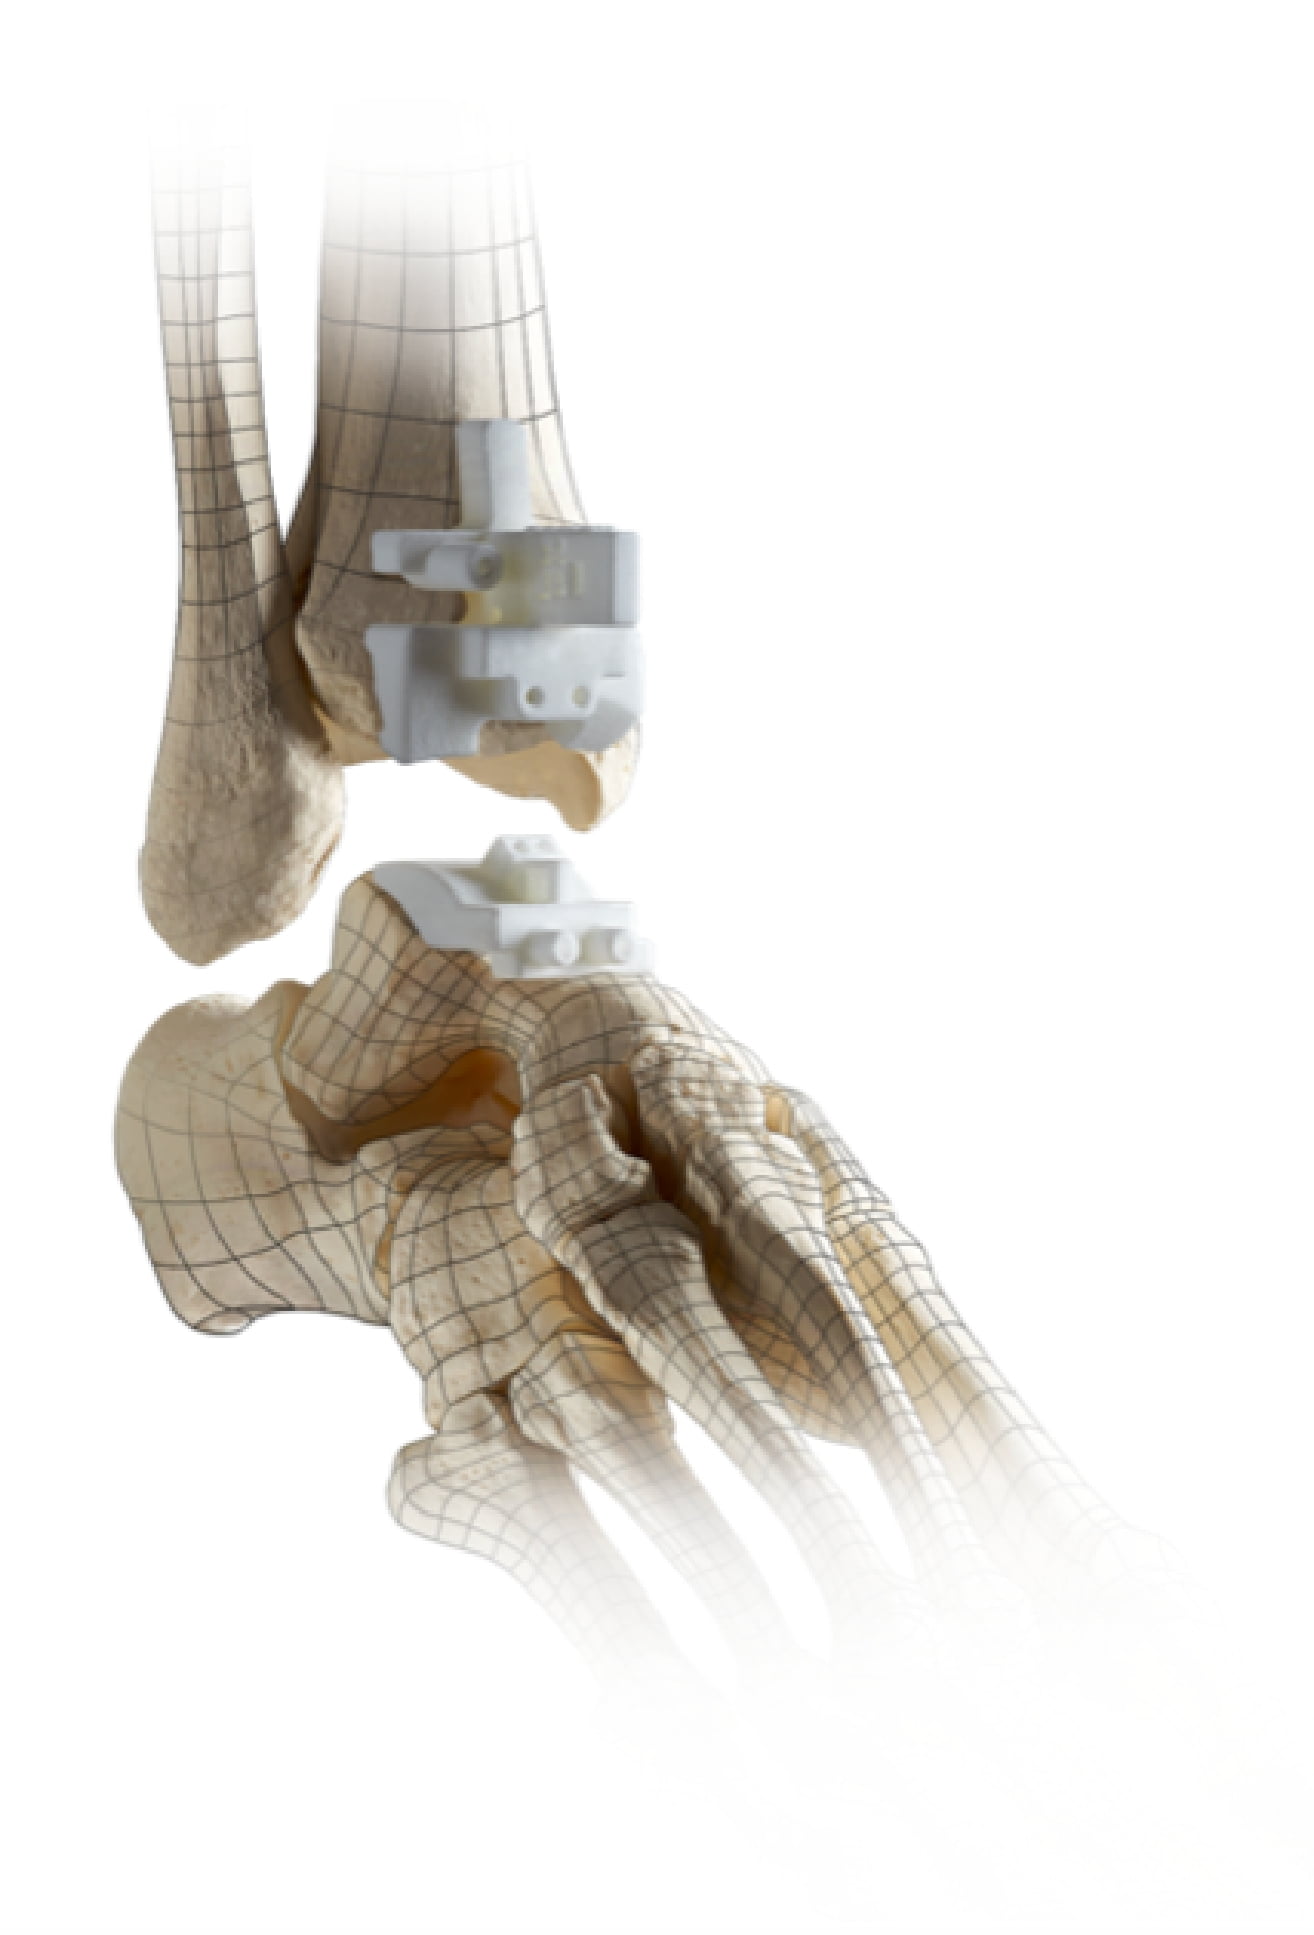 Why Total Ankle Replacement Stryker